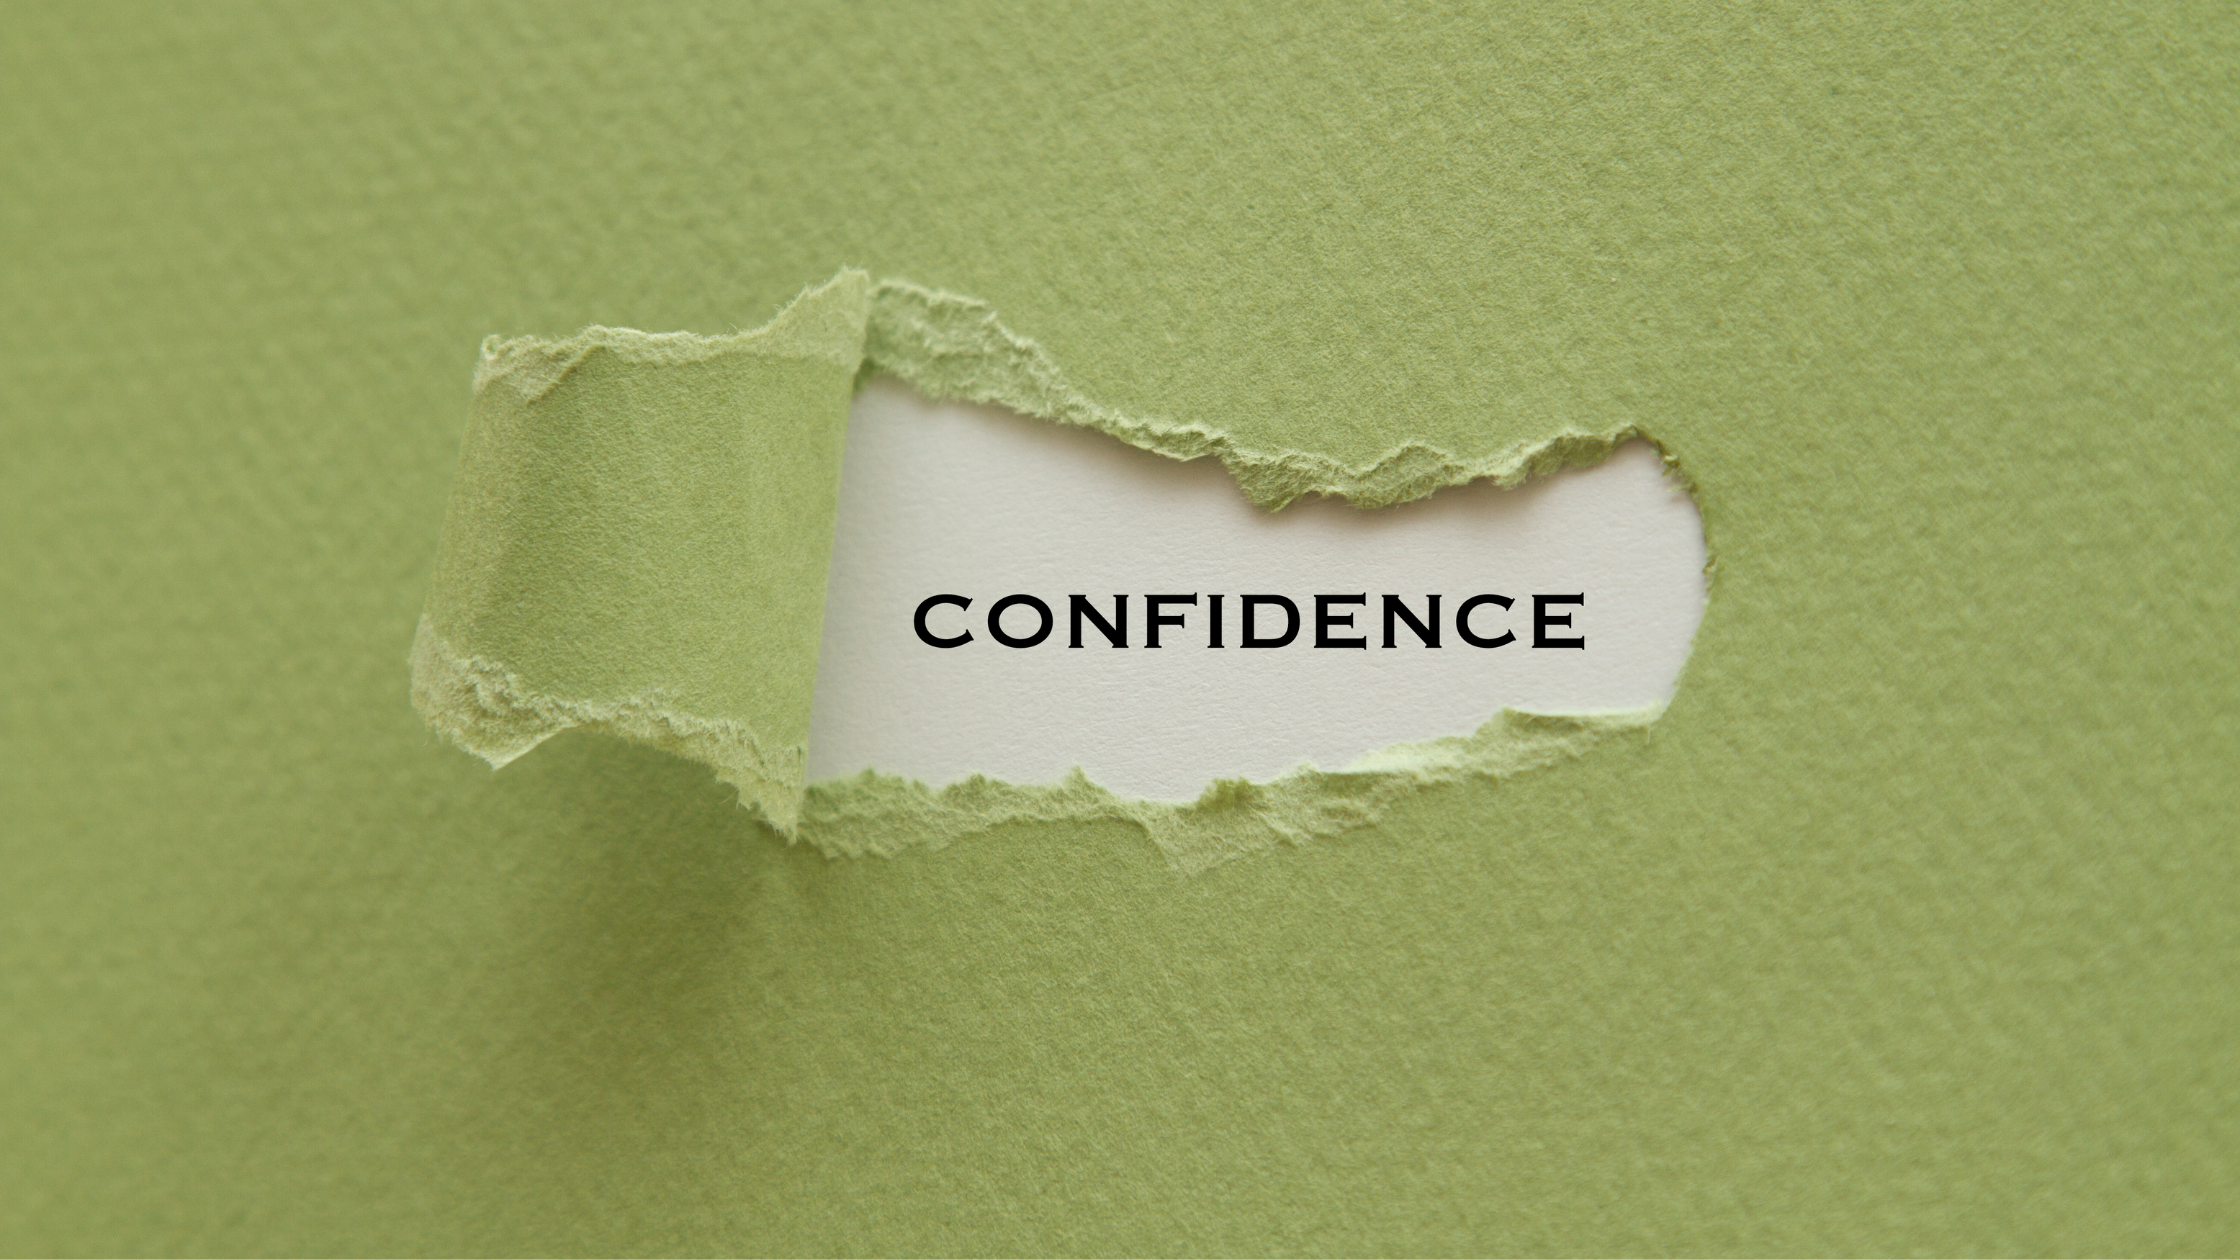 New Job? Use these confidence tips